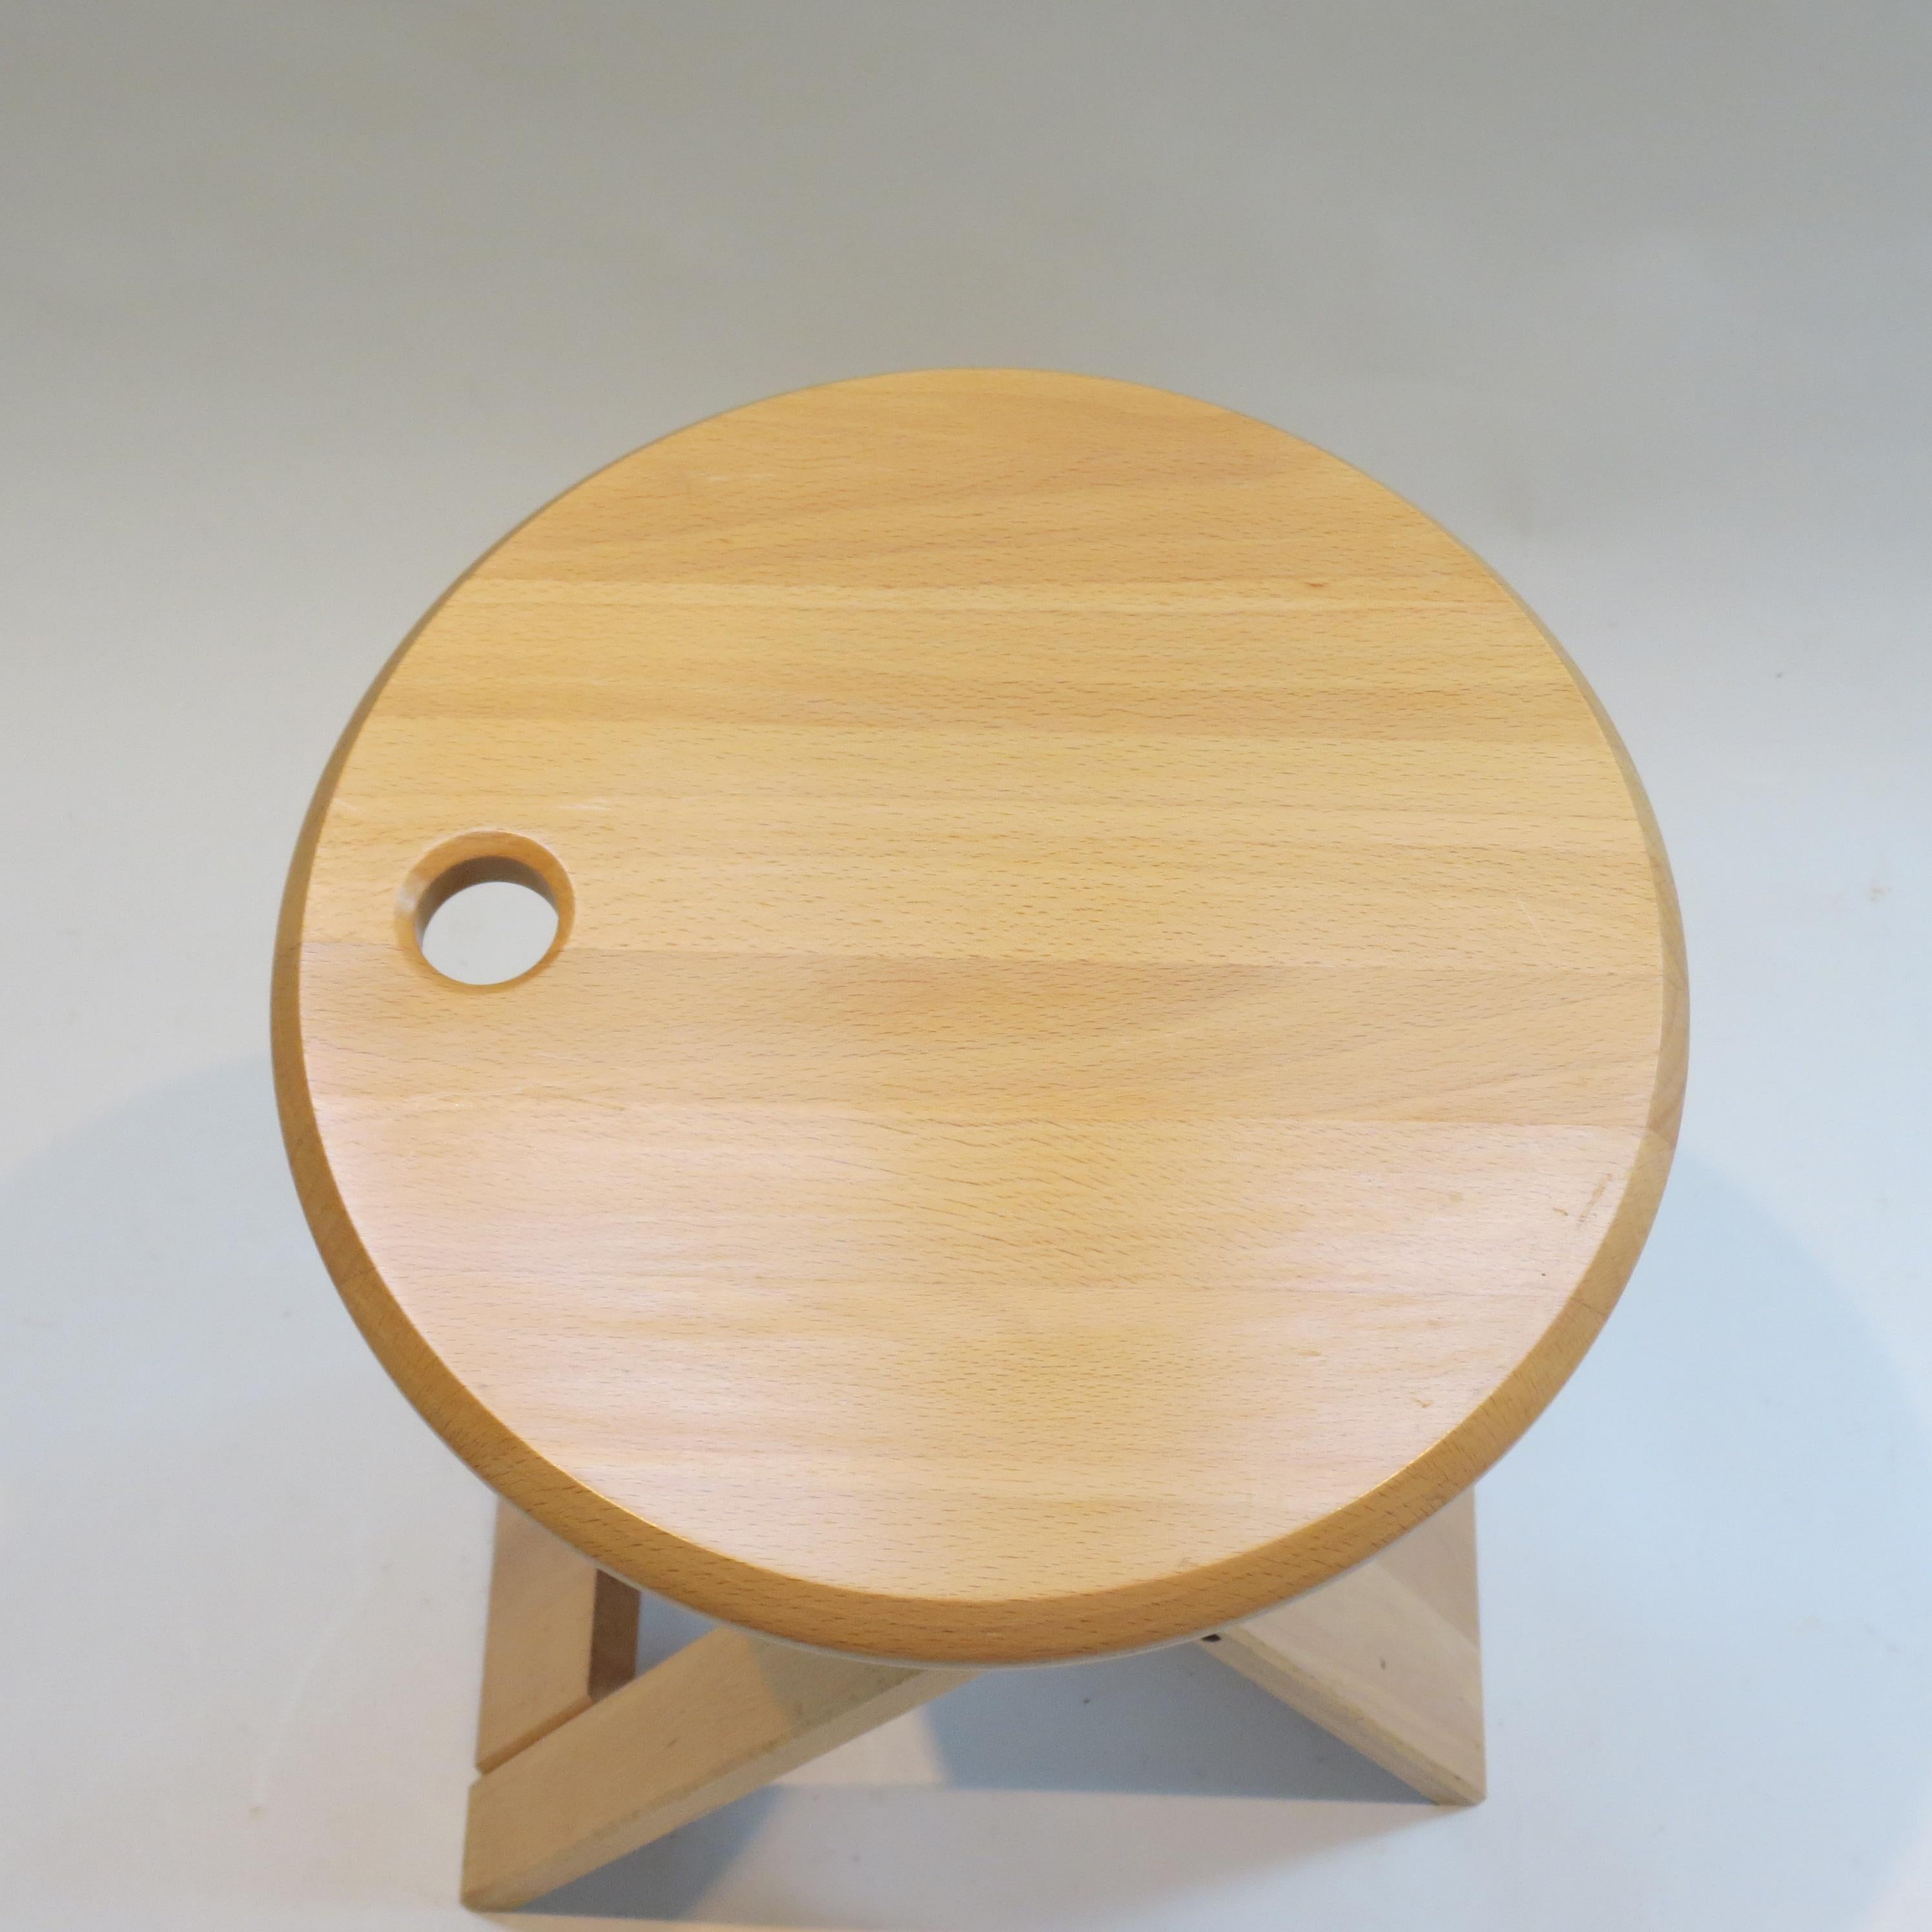 “Suzy” stool, designed by Adrian Reed 1984/1985 and manufactured by Princes Design Works Ltd.  This stool was available in two sizes, this is the taller version.

Made from solid Beech with plastic/rubber hinges. The stools fold flat when not in